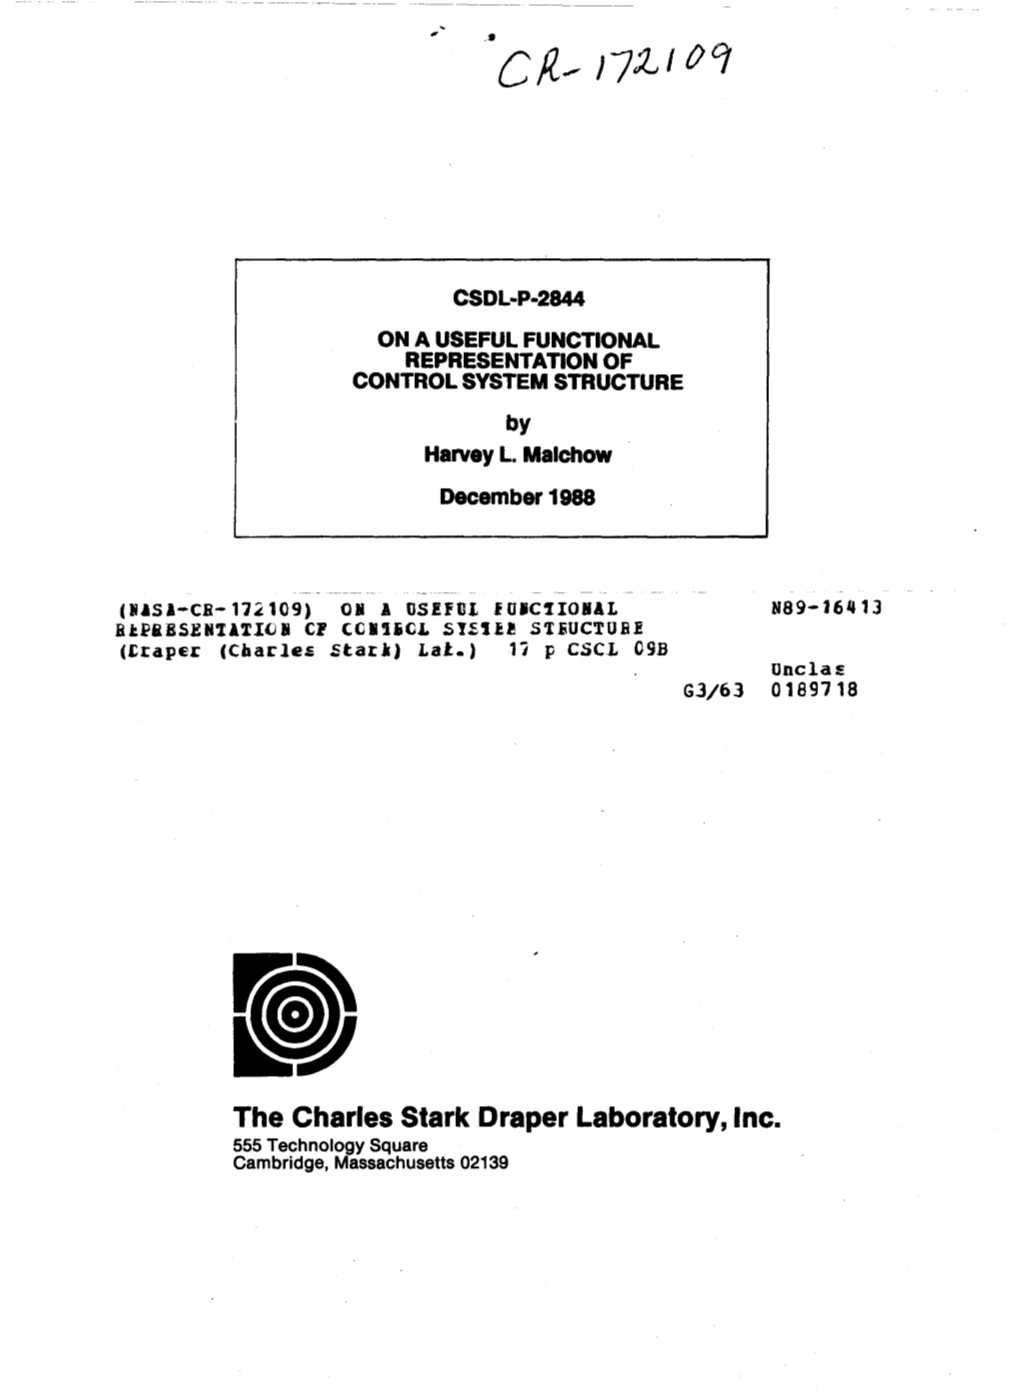 The Charles Stark Draper Laboratory, Inc. 555 Technology Square Cambridge, Massachusetts 02139 on a USEFUL FUNCTIONAL REPRESENTATION of CONTROL SYSTEM STRUCTURE